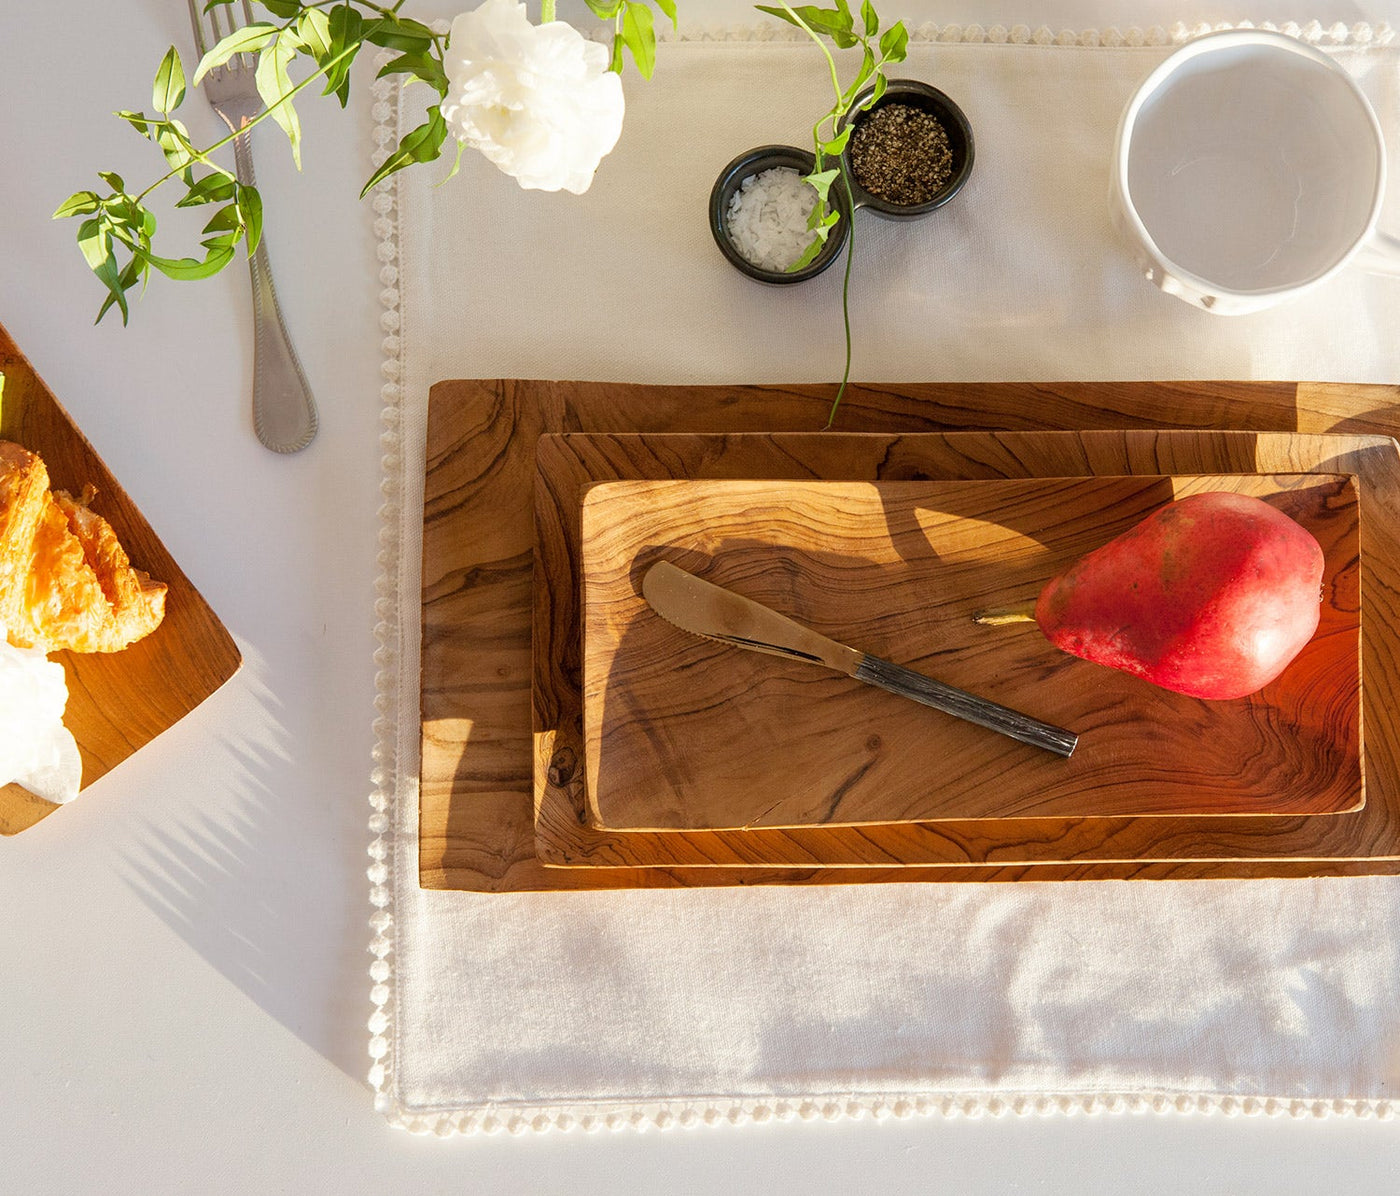 3-Piece Wooden Serving Trays